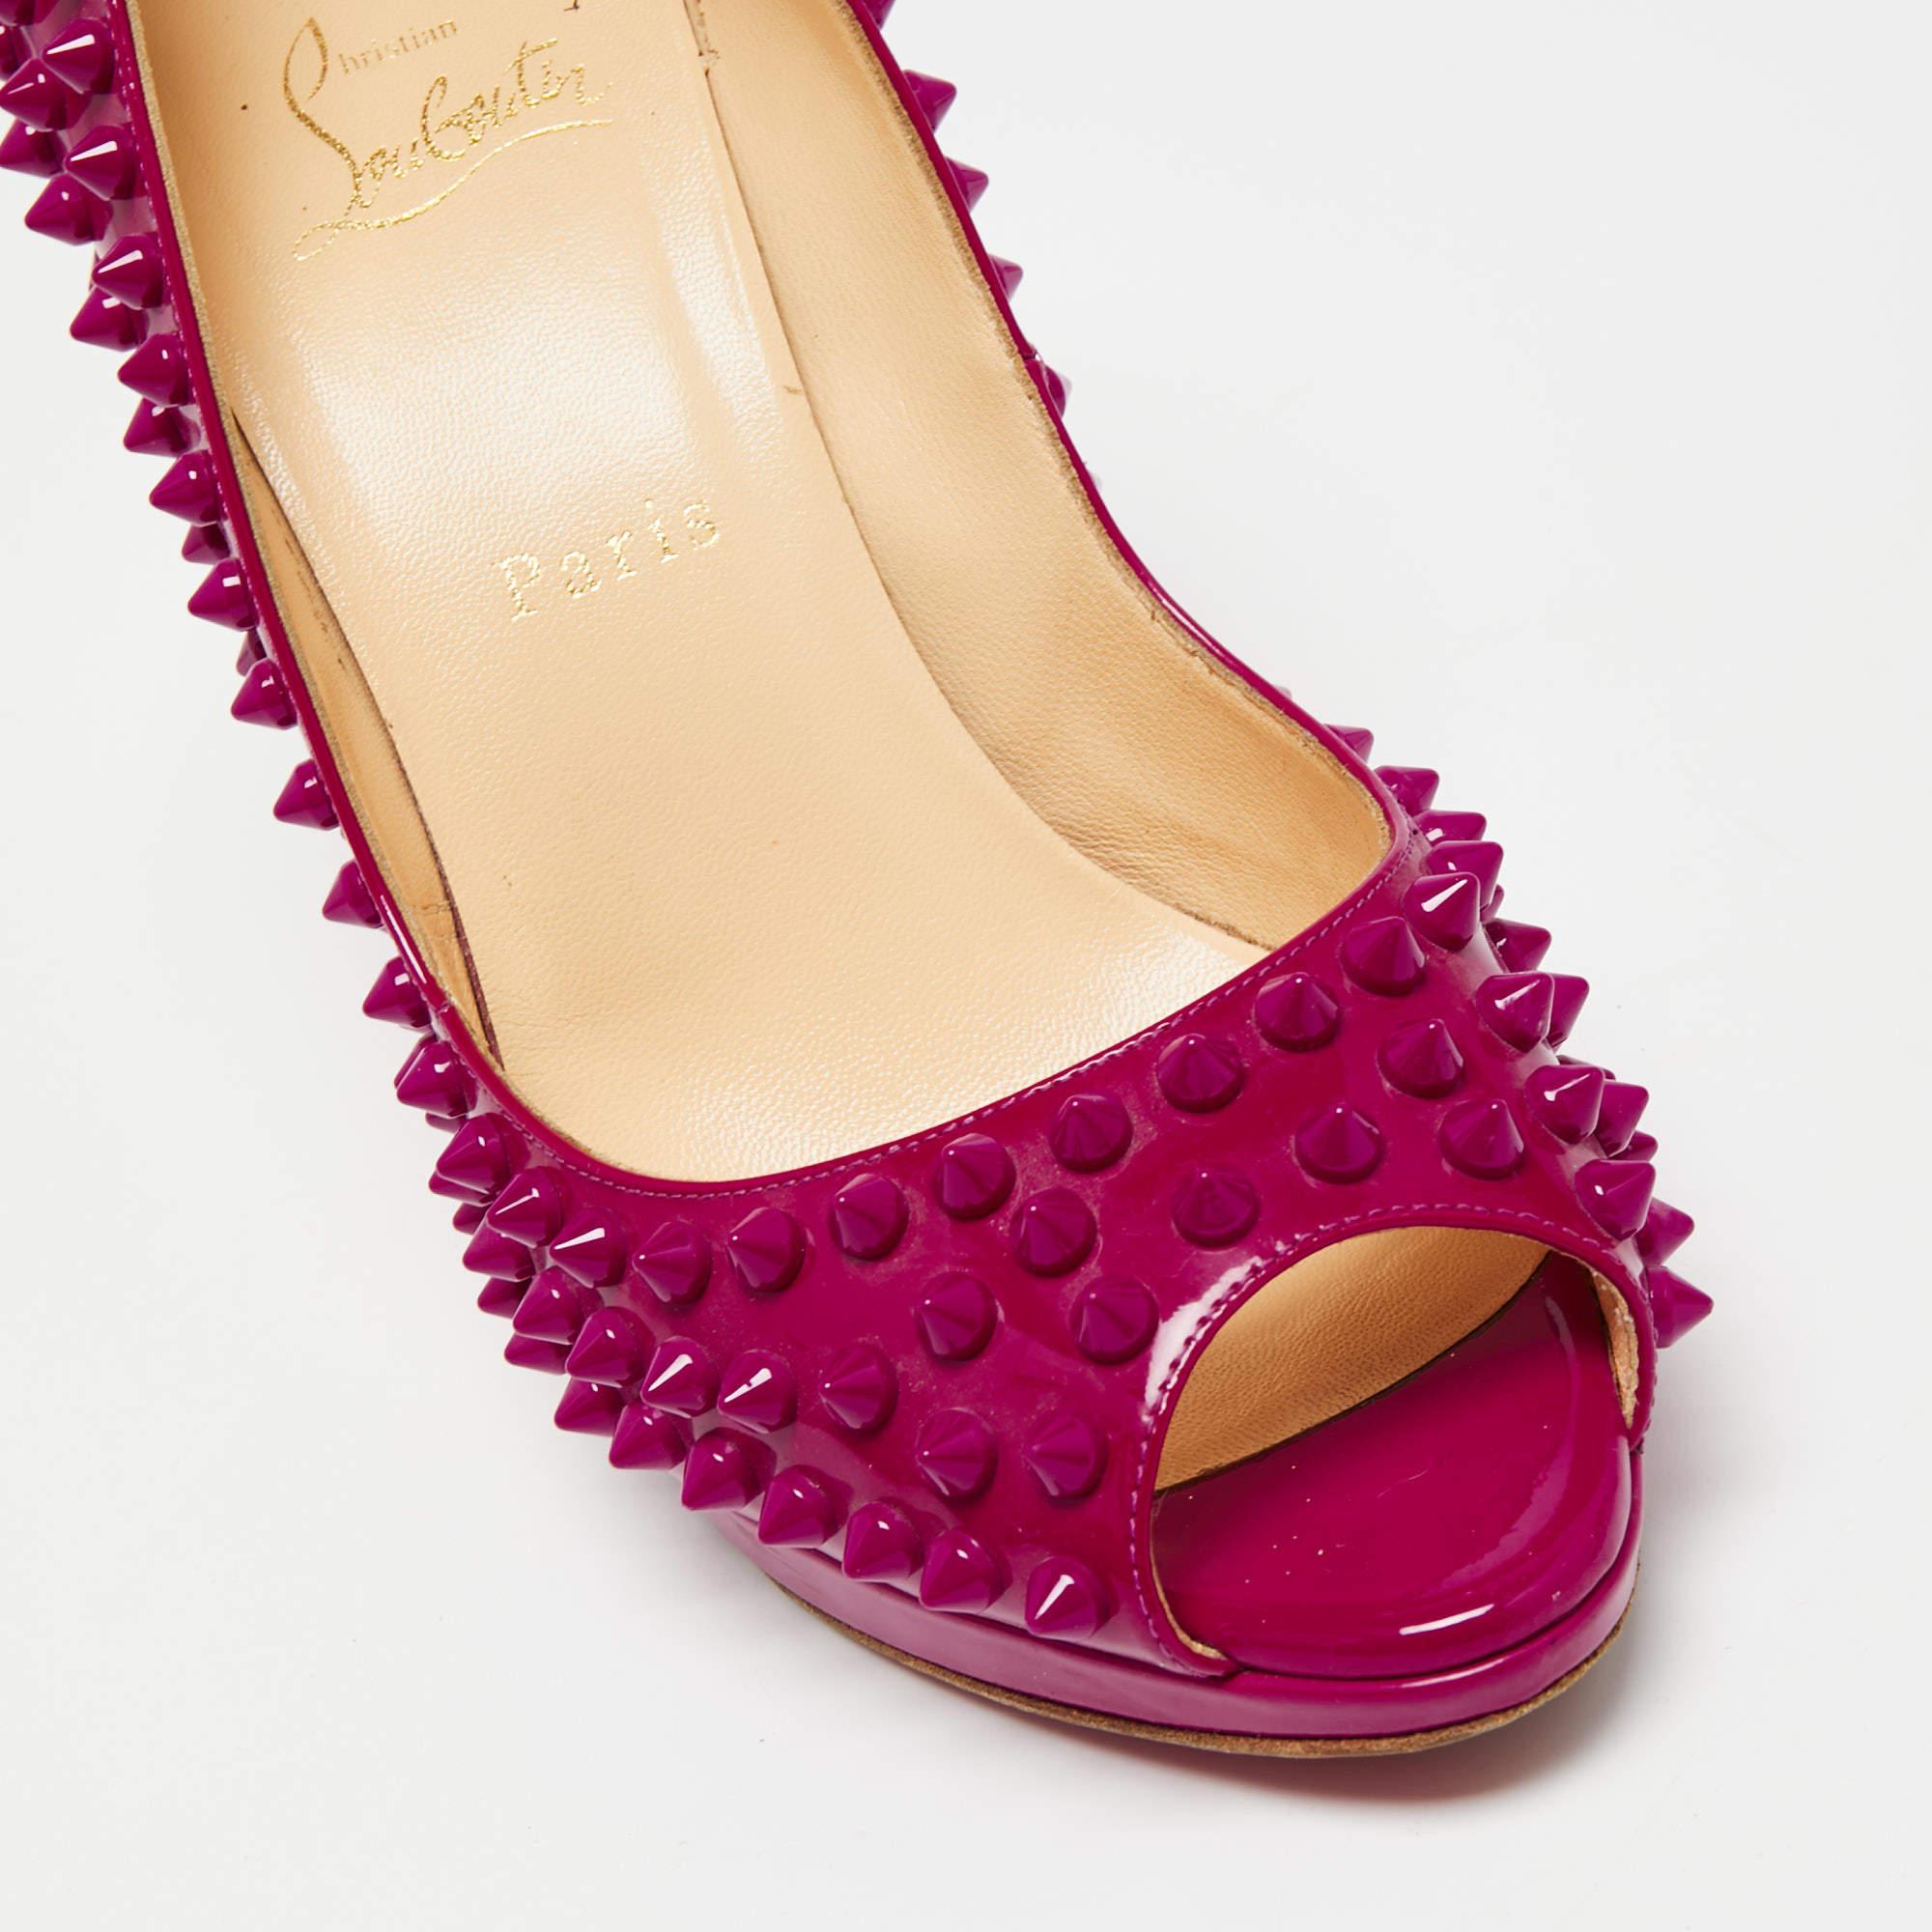 Christian Louboutin Hot Pink Patent Yolanda Spiked Peep-Toe Pumps Size 38.5 For Sale 4